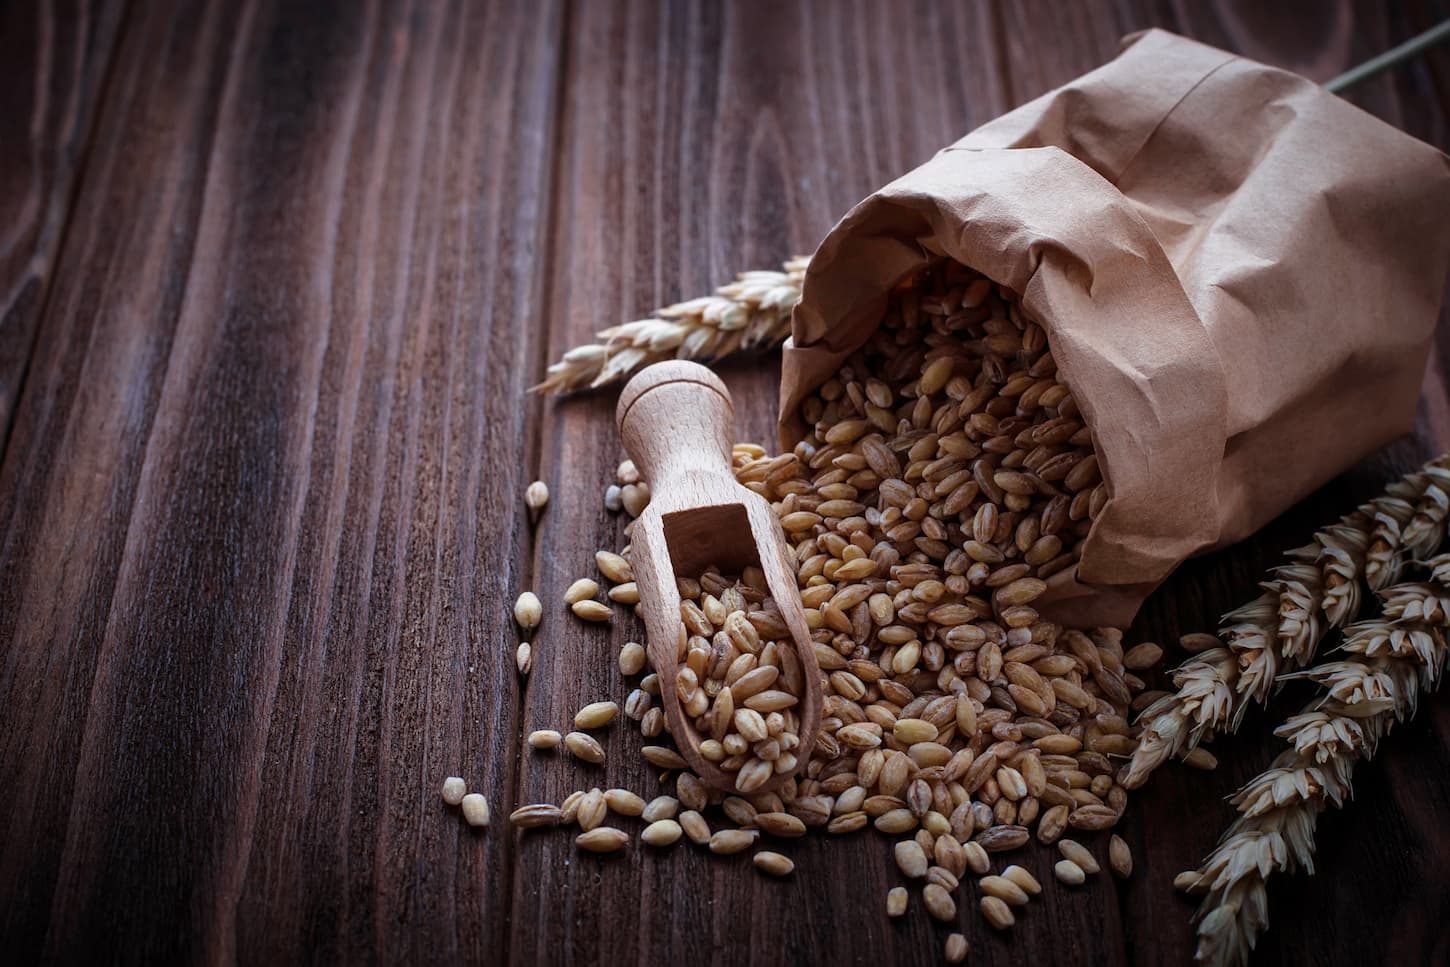 An image of wheat grains in a paper or store bag.